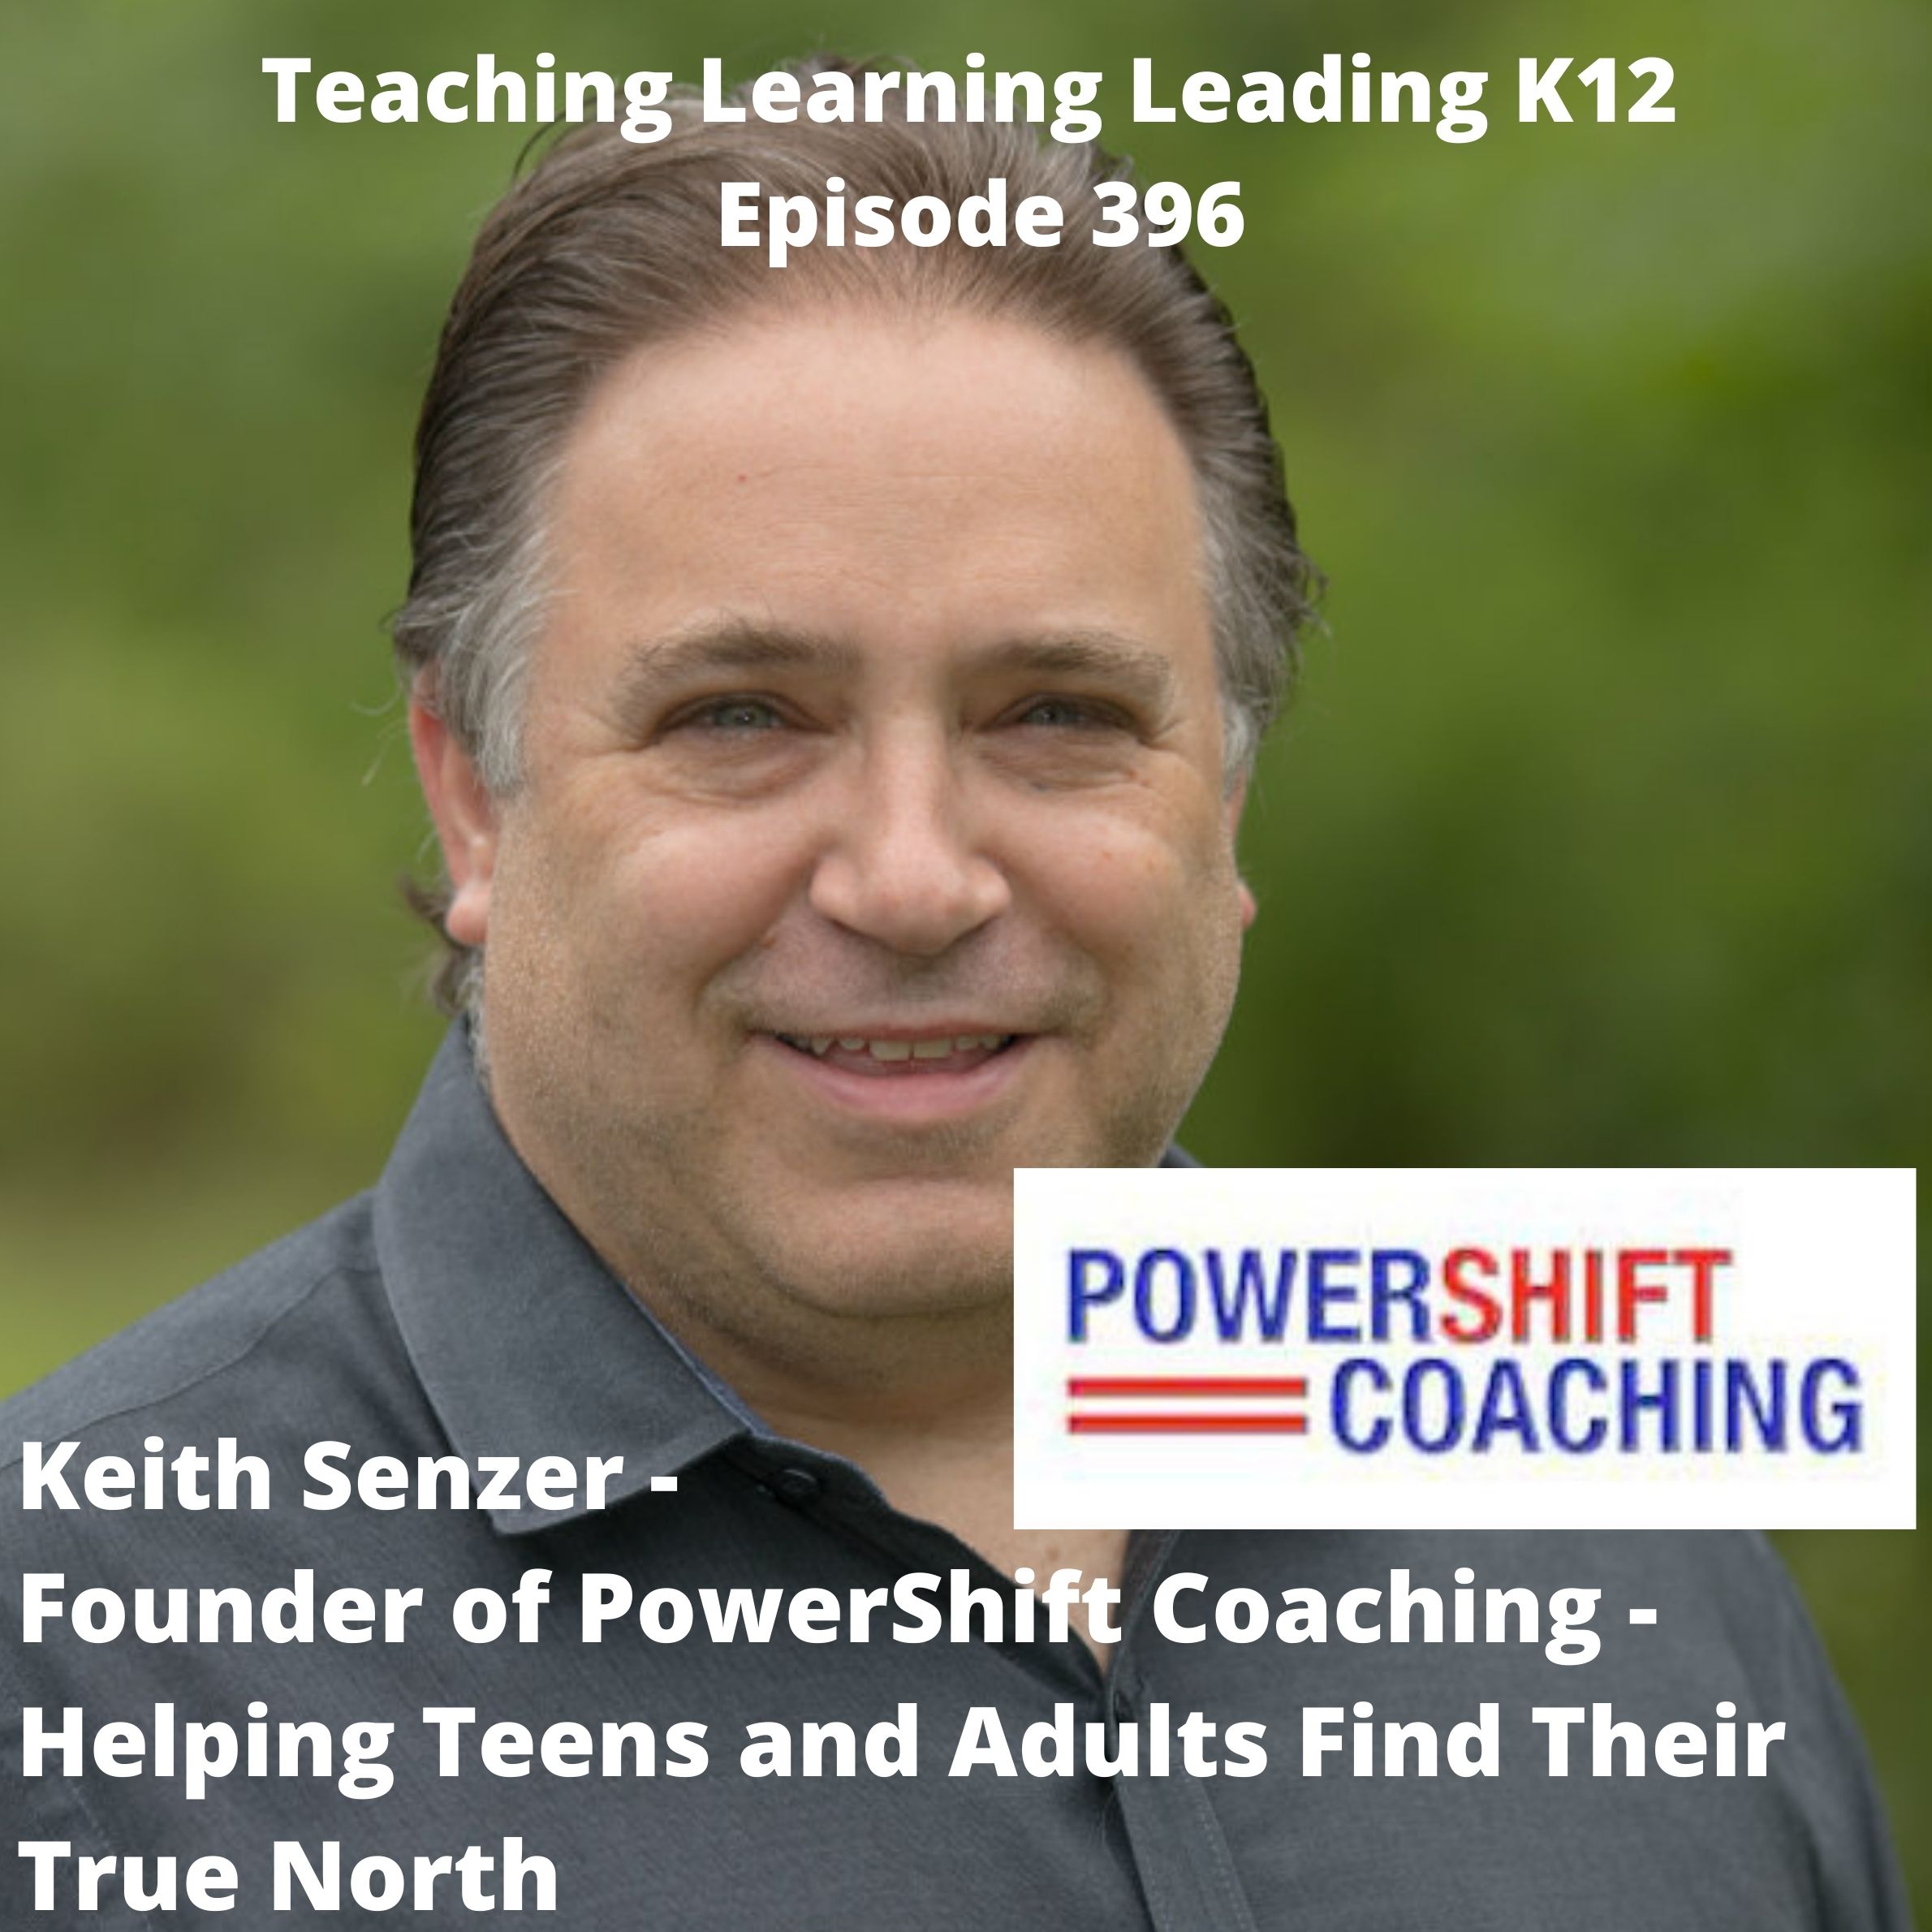 Keith Senzer - Founder of PowerShift Coaching - Helping Teens and Adults Find Their True North - 396 Image